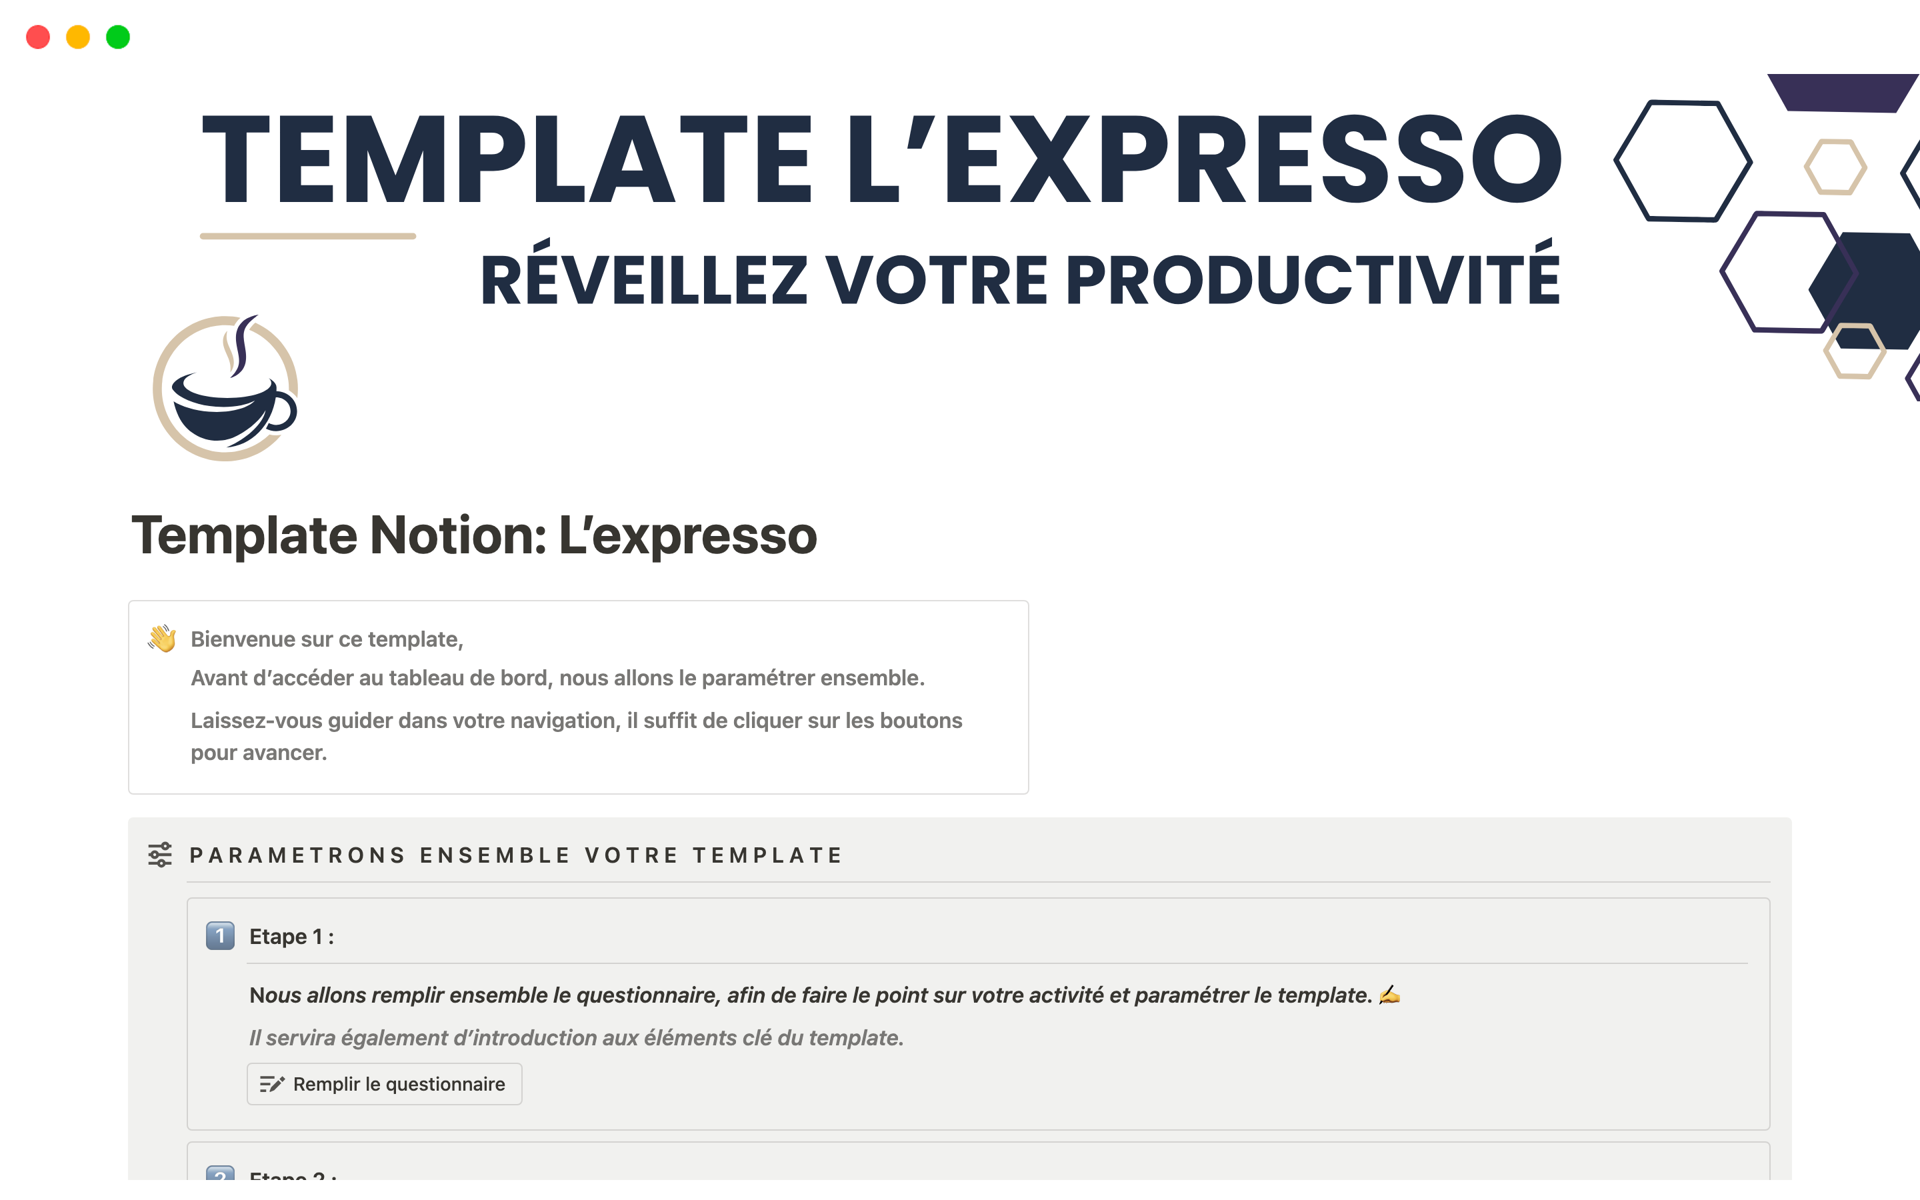 A template preview for Template Notion: L’expresso